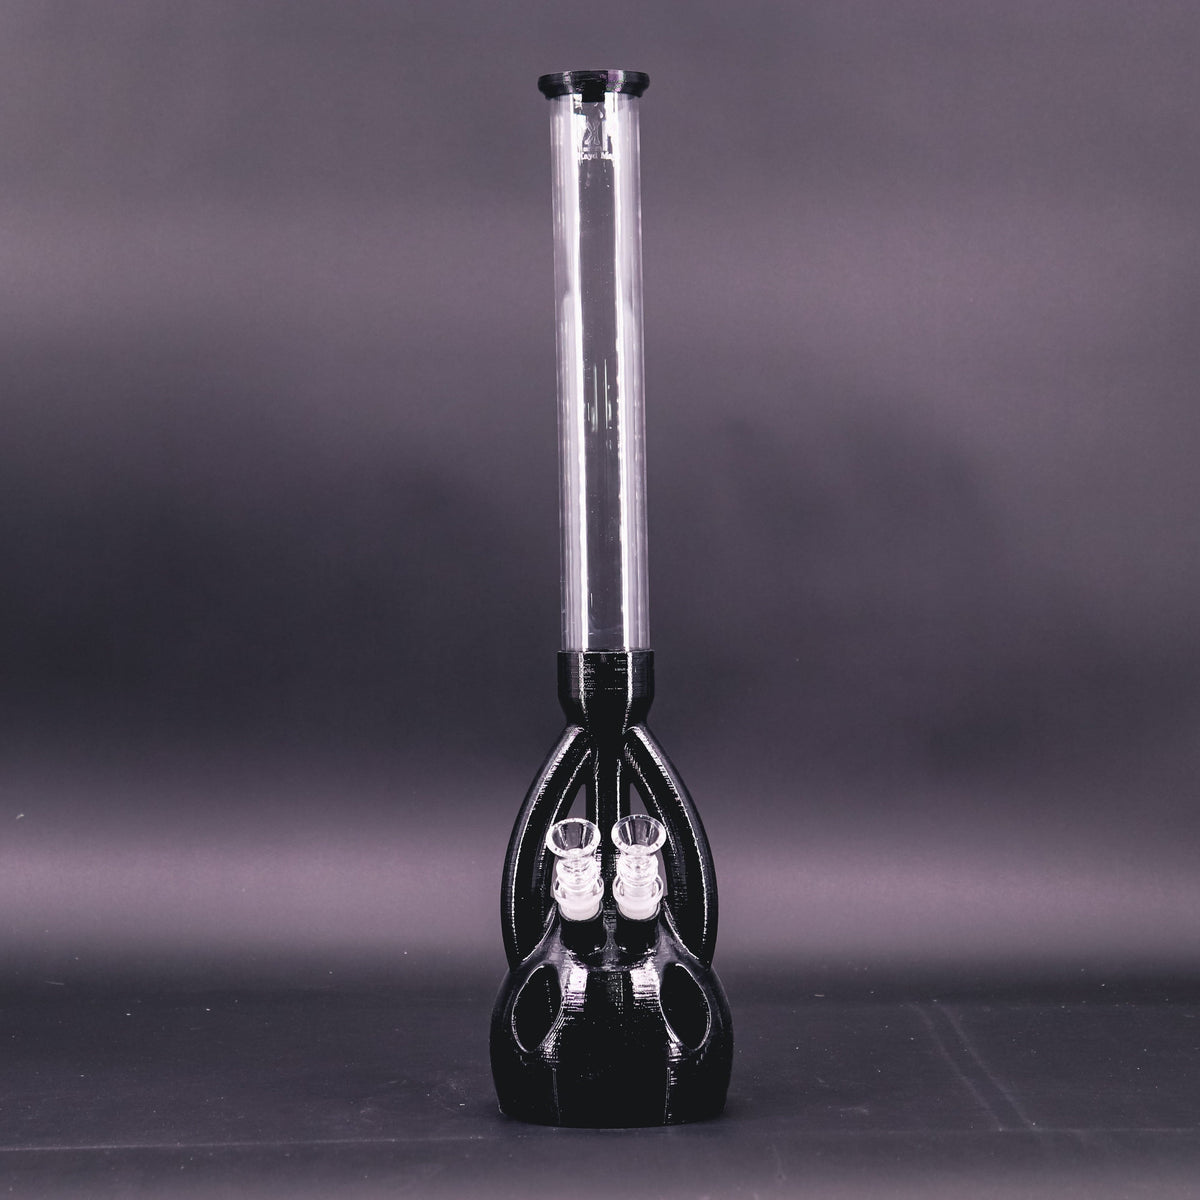 Black color of The Duo - Amazing 3D Printed Water Pipe by Kayd Mayd.